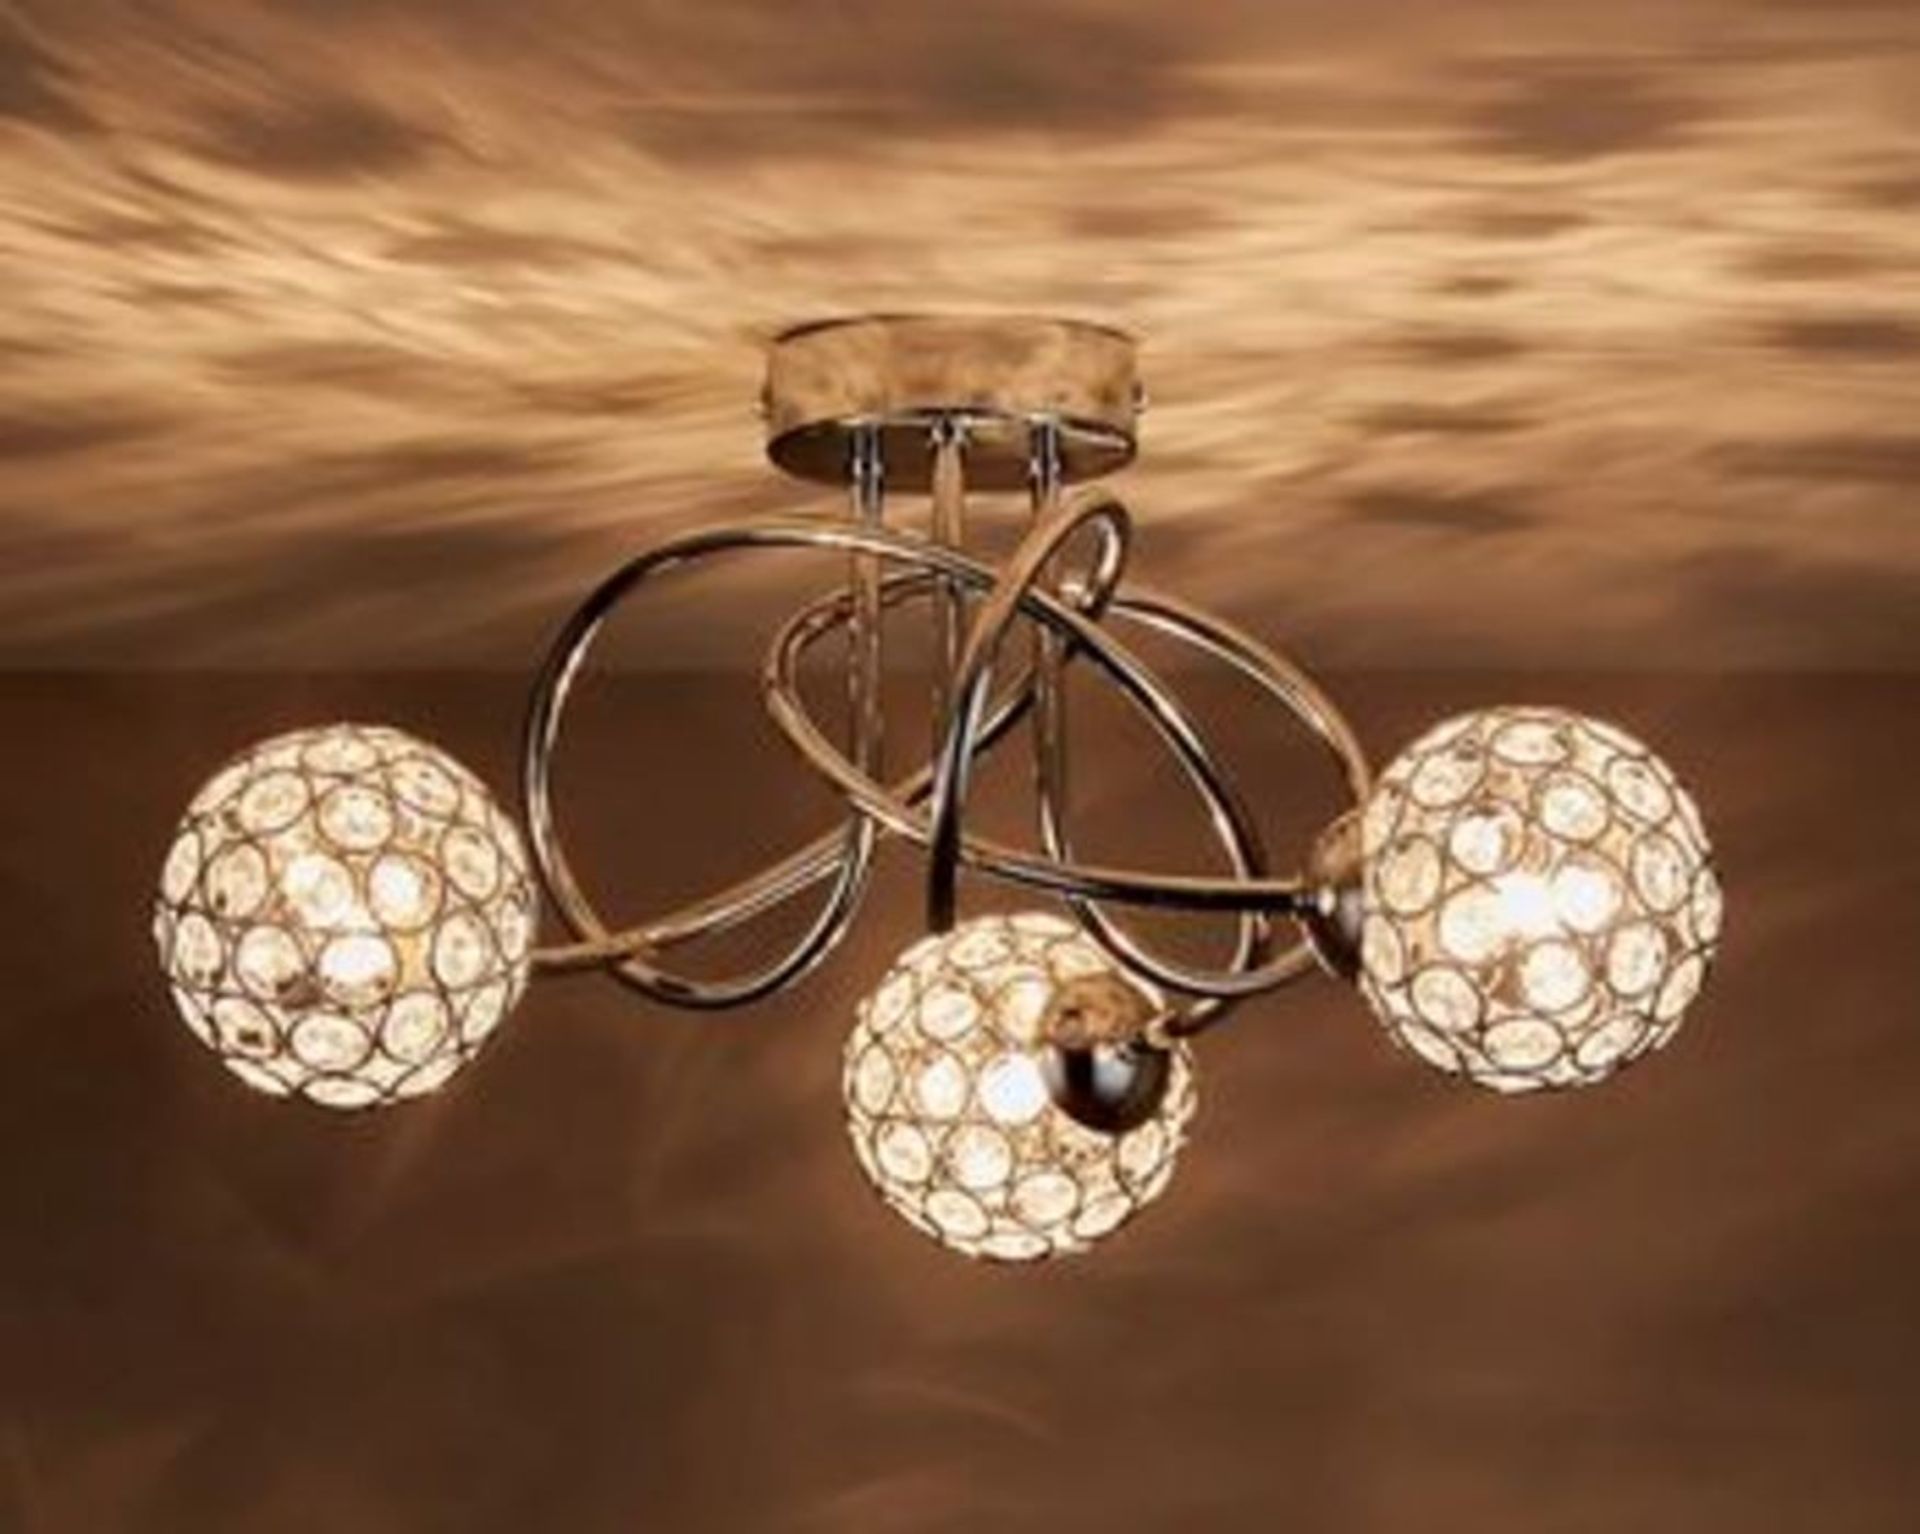 1 X MANTUS CHROME EFFECT 3 LAMP CEILING LIGHT / RRP £38.00 / AS NEW CONDITION